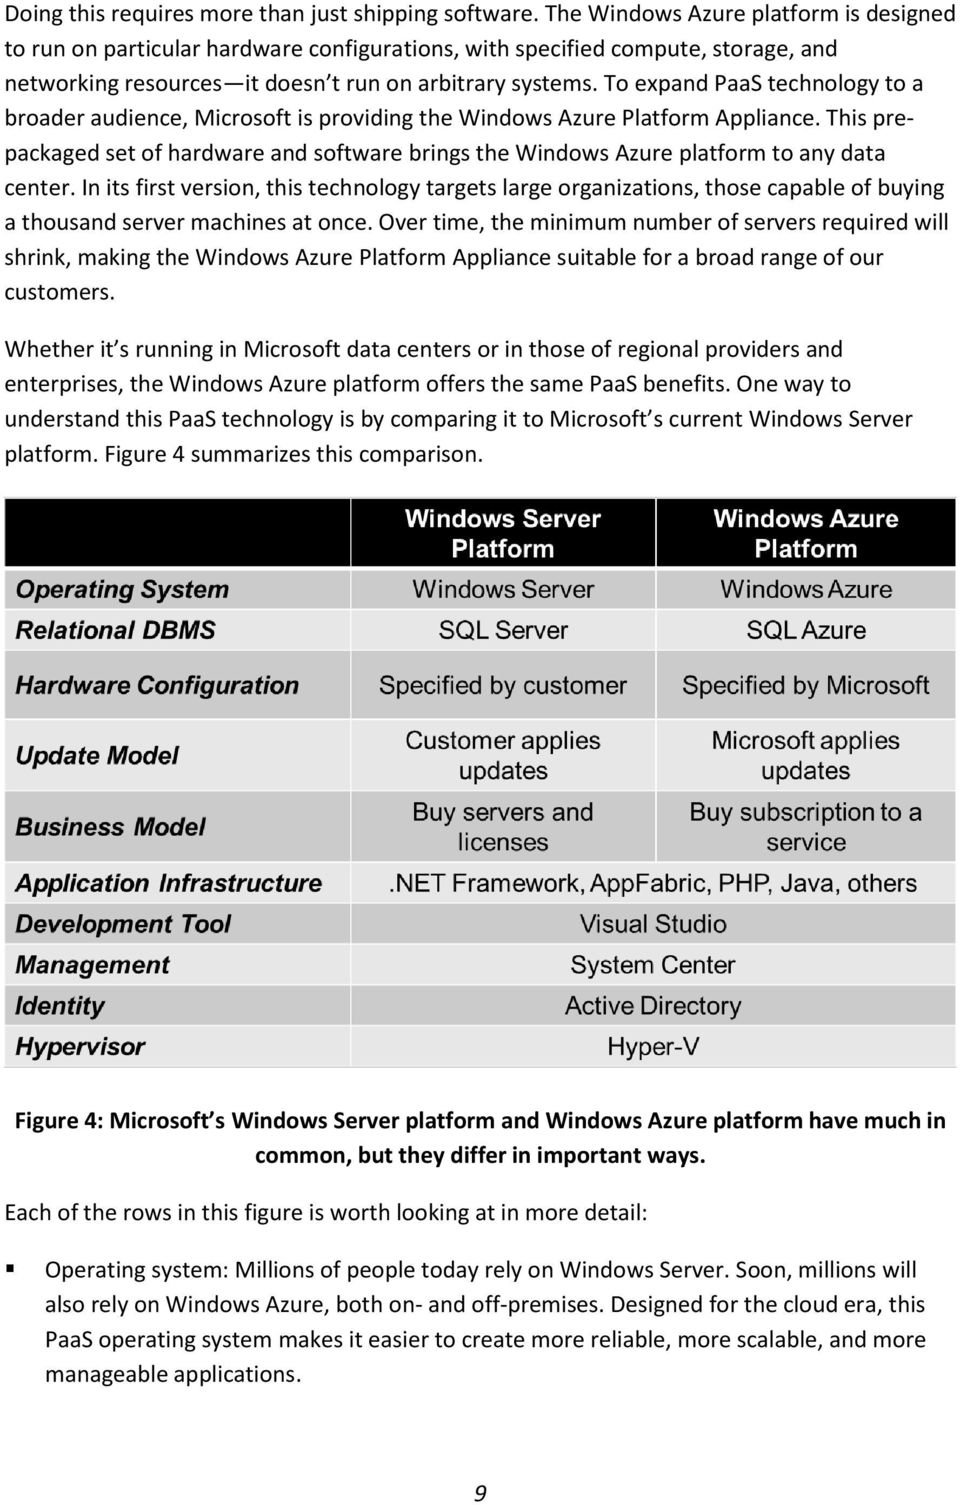 To expand PaaS technology to a broader audience, Microsoft is providing the Windows Azure Platform Appliance.